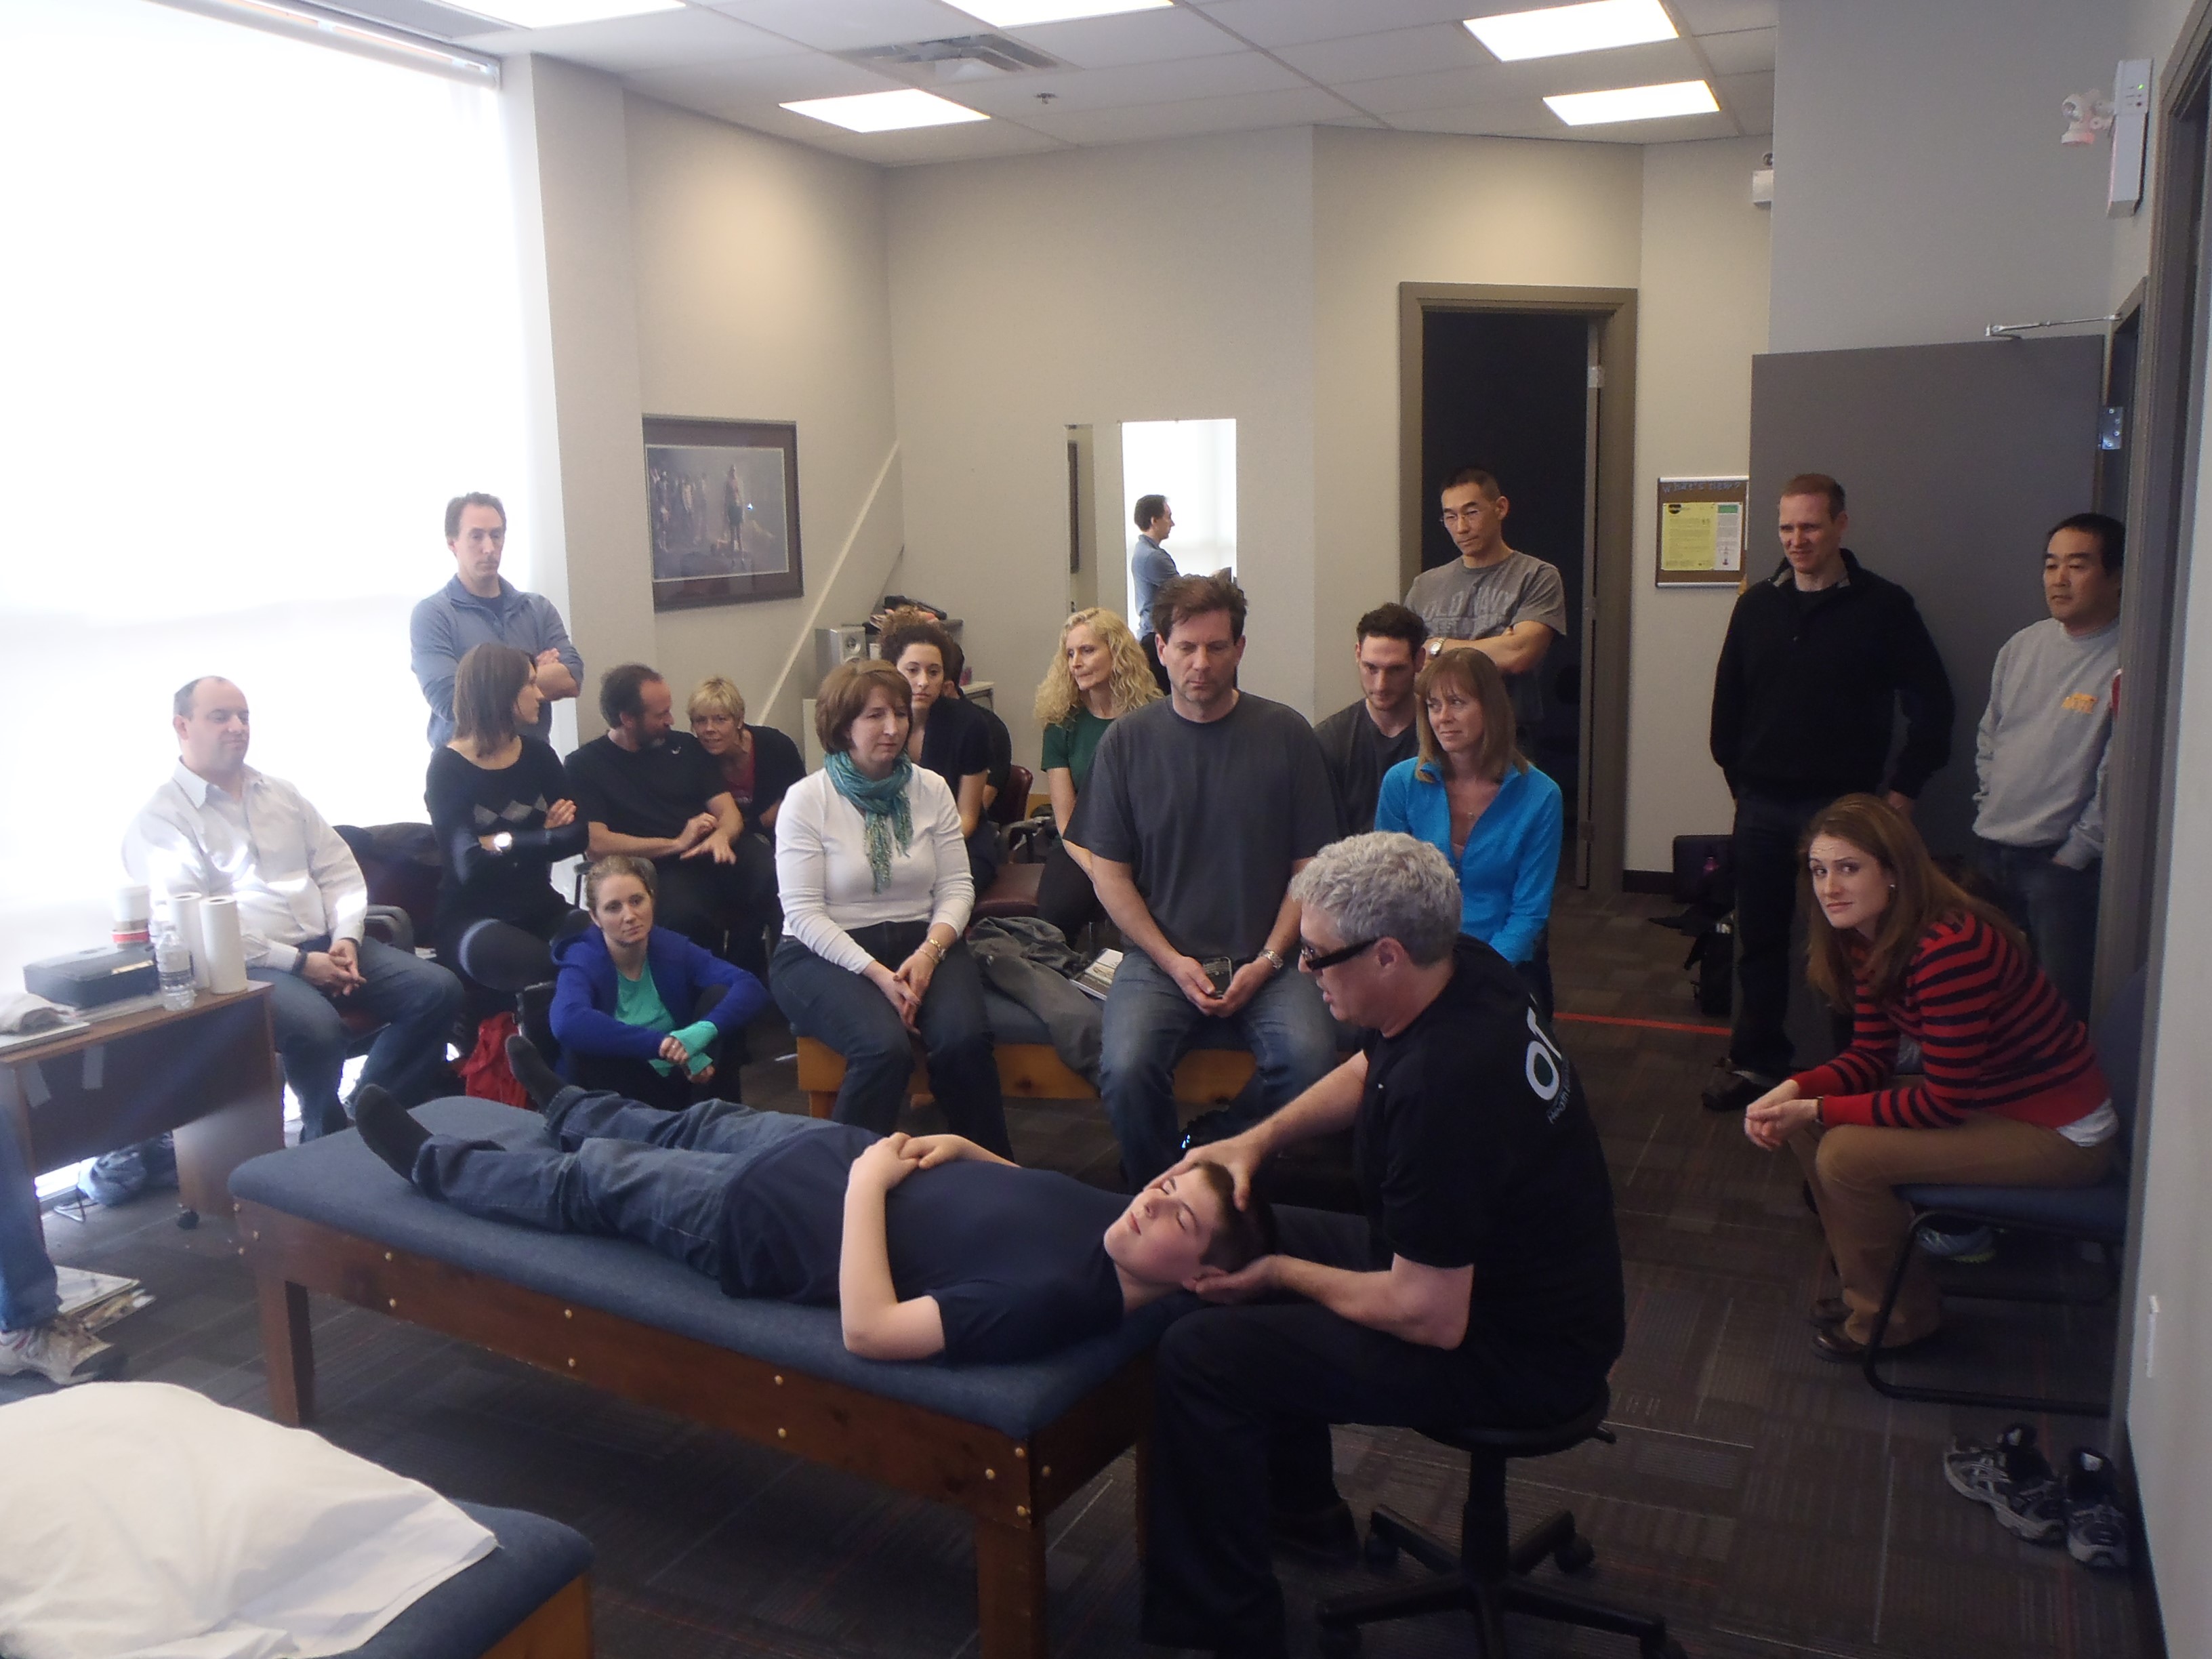 Dr. Murphy performs an adjustment before the crowd at the OTZ Seminar in Toronto.